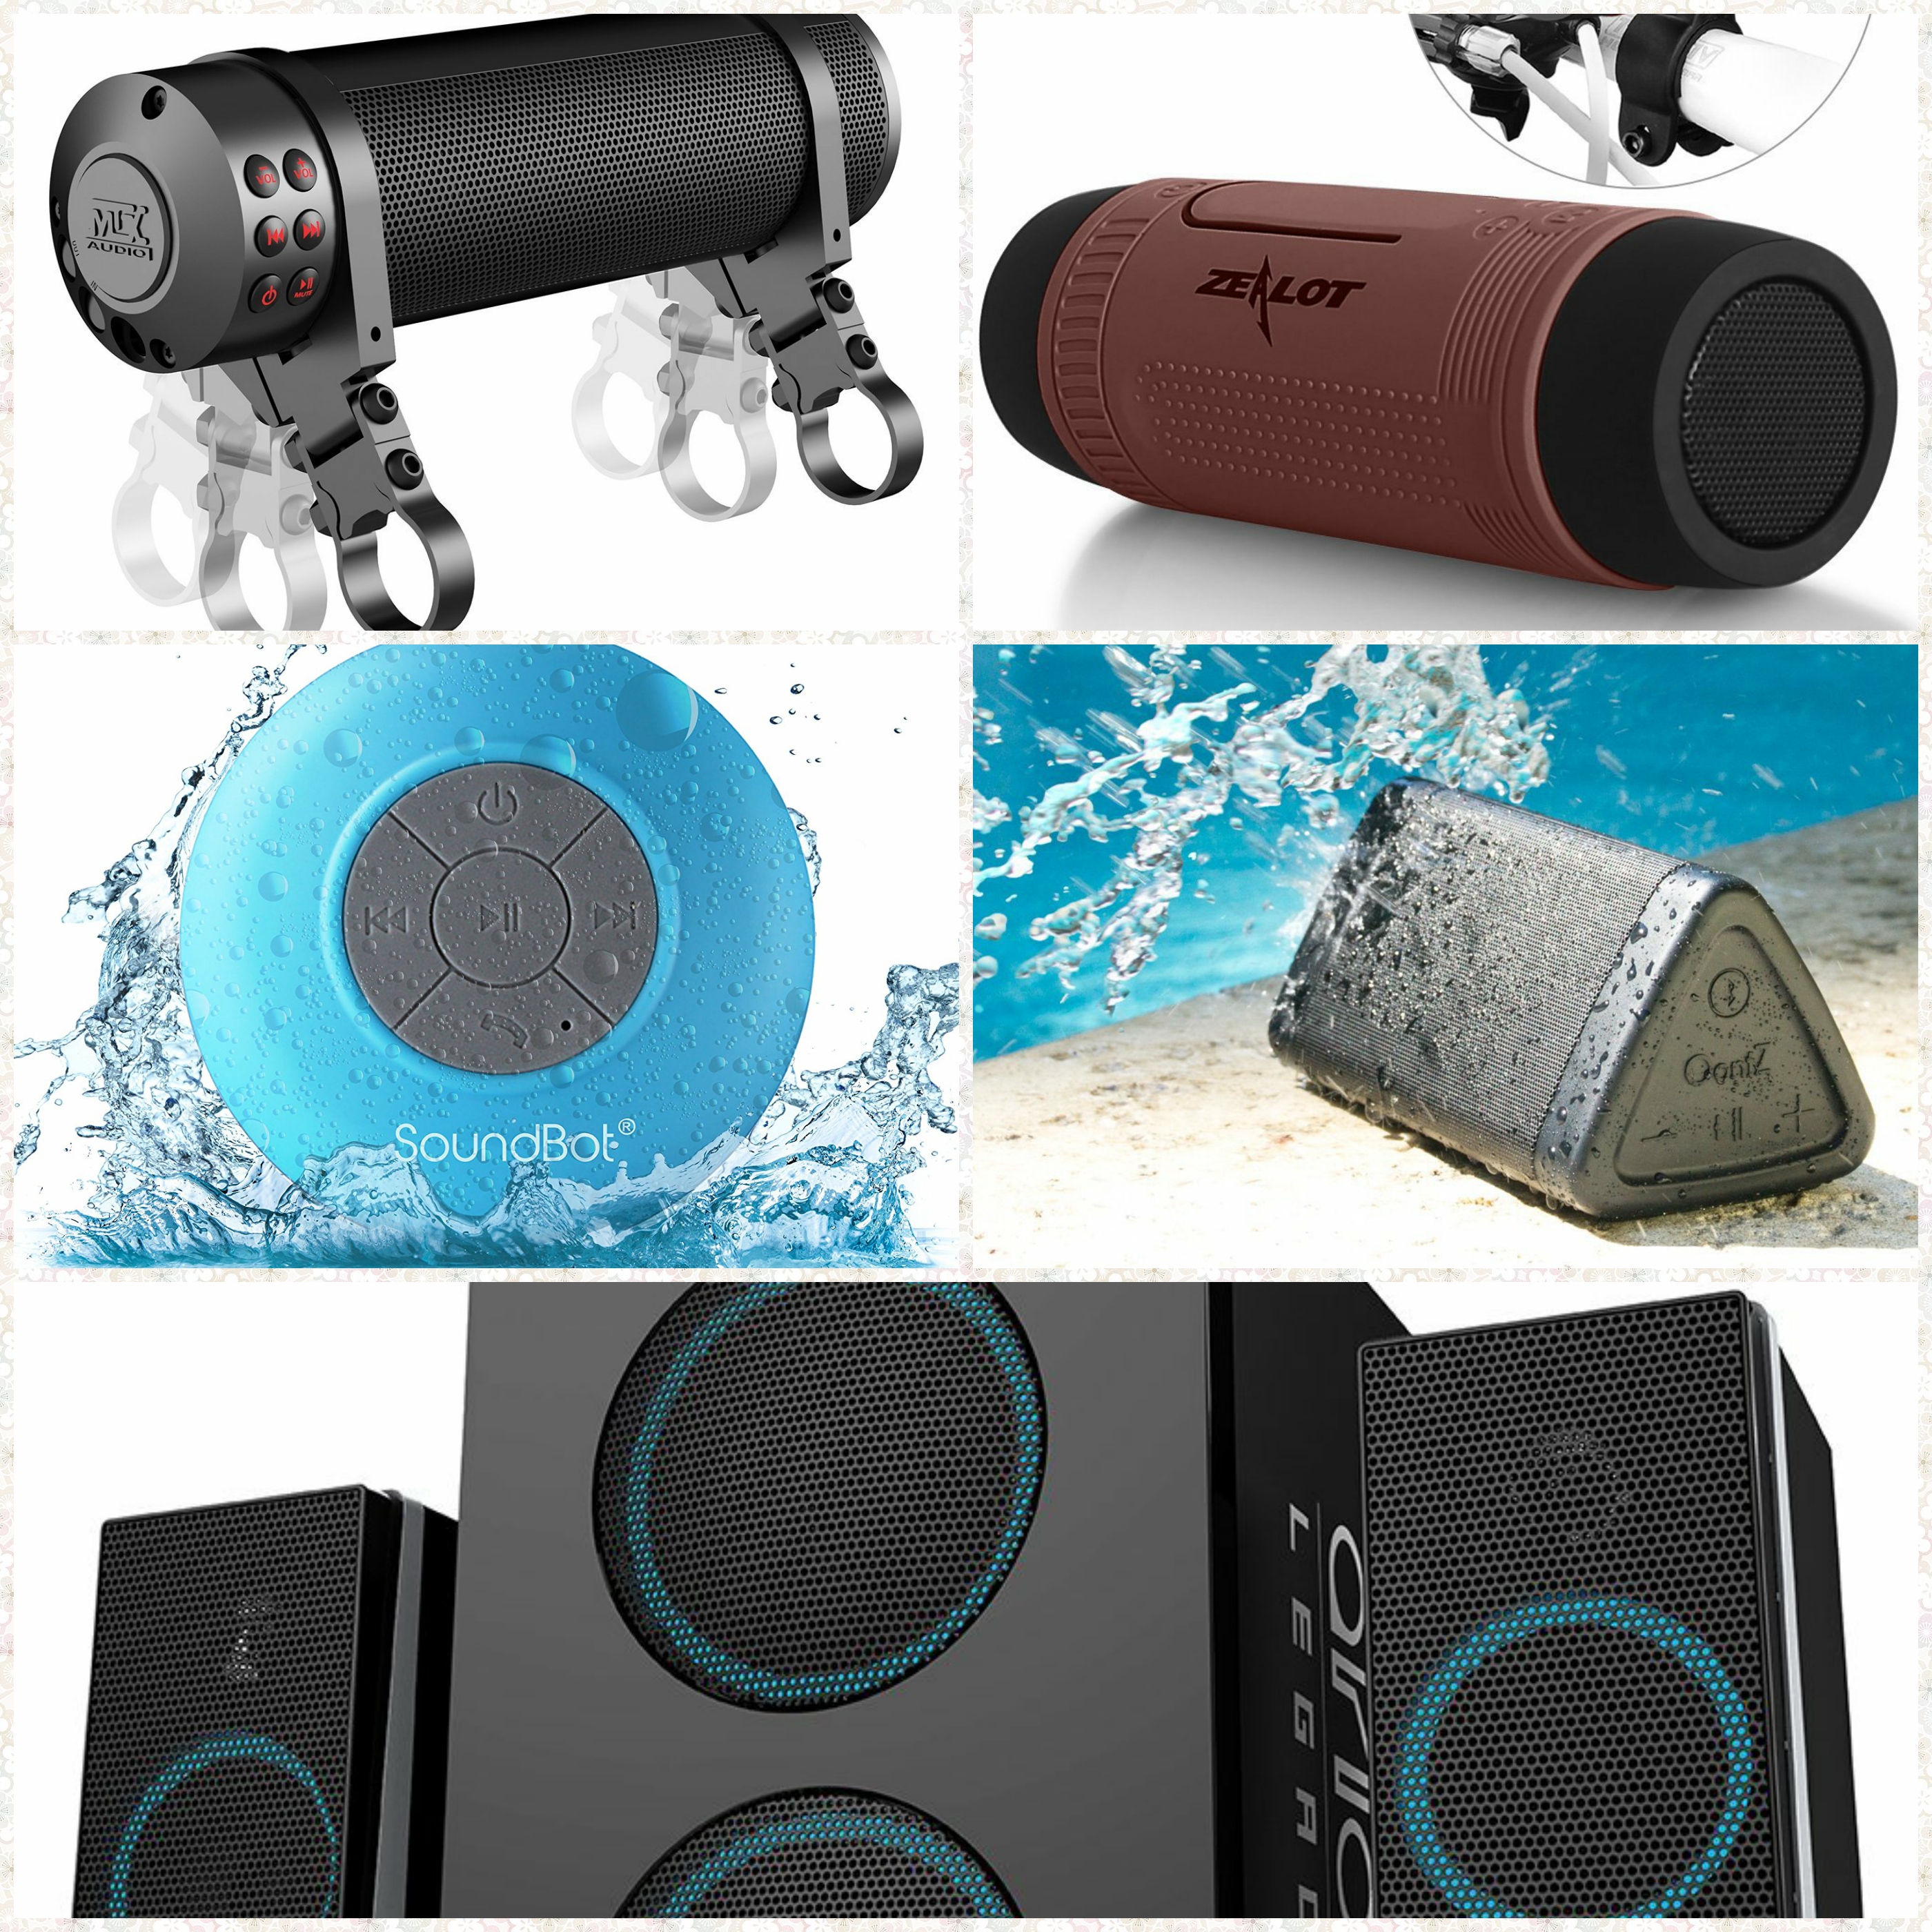 Top 5 Best Speakers You Must Have for Home and Outdoor